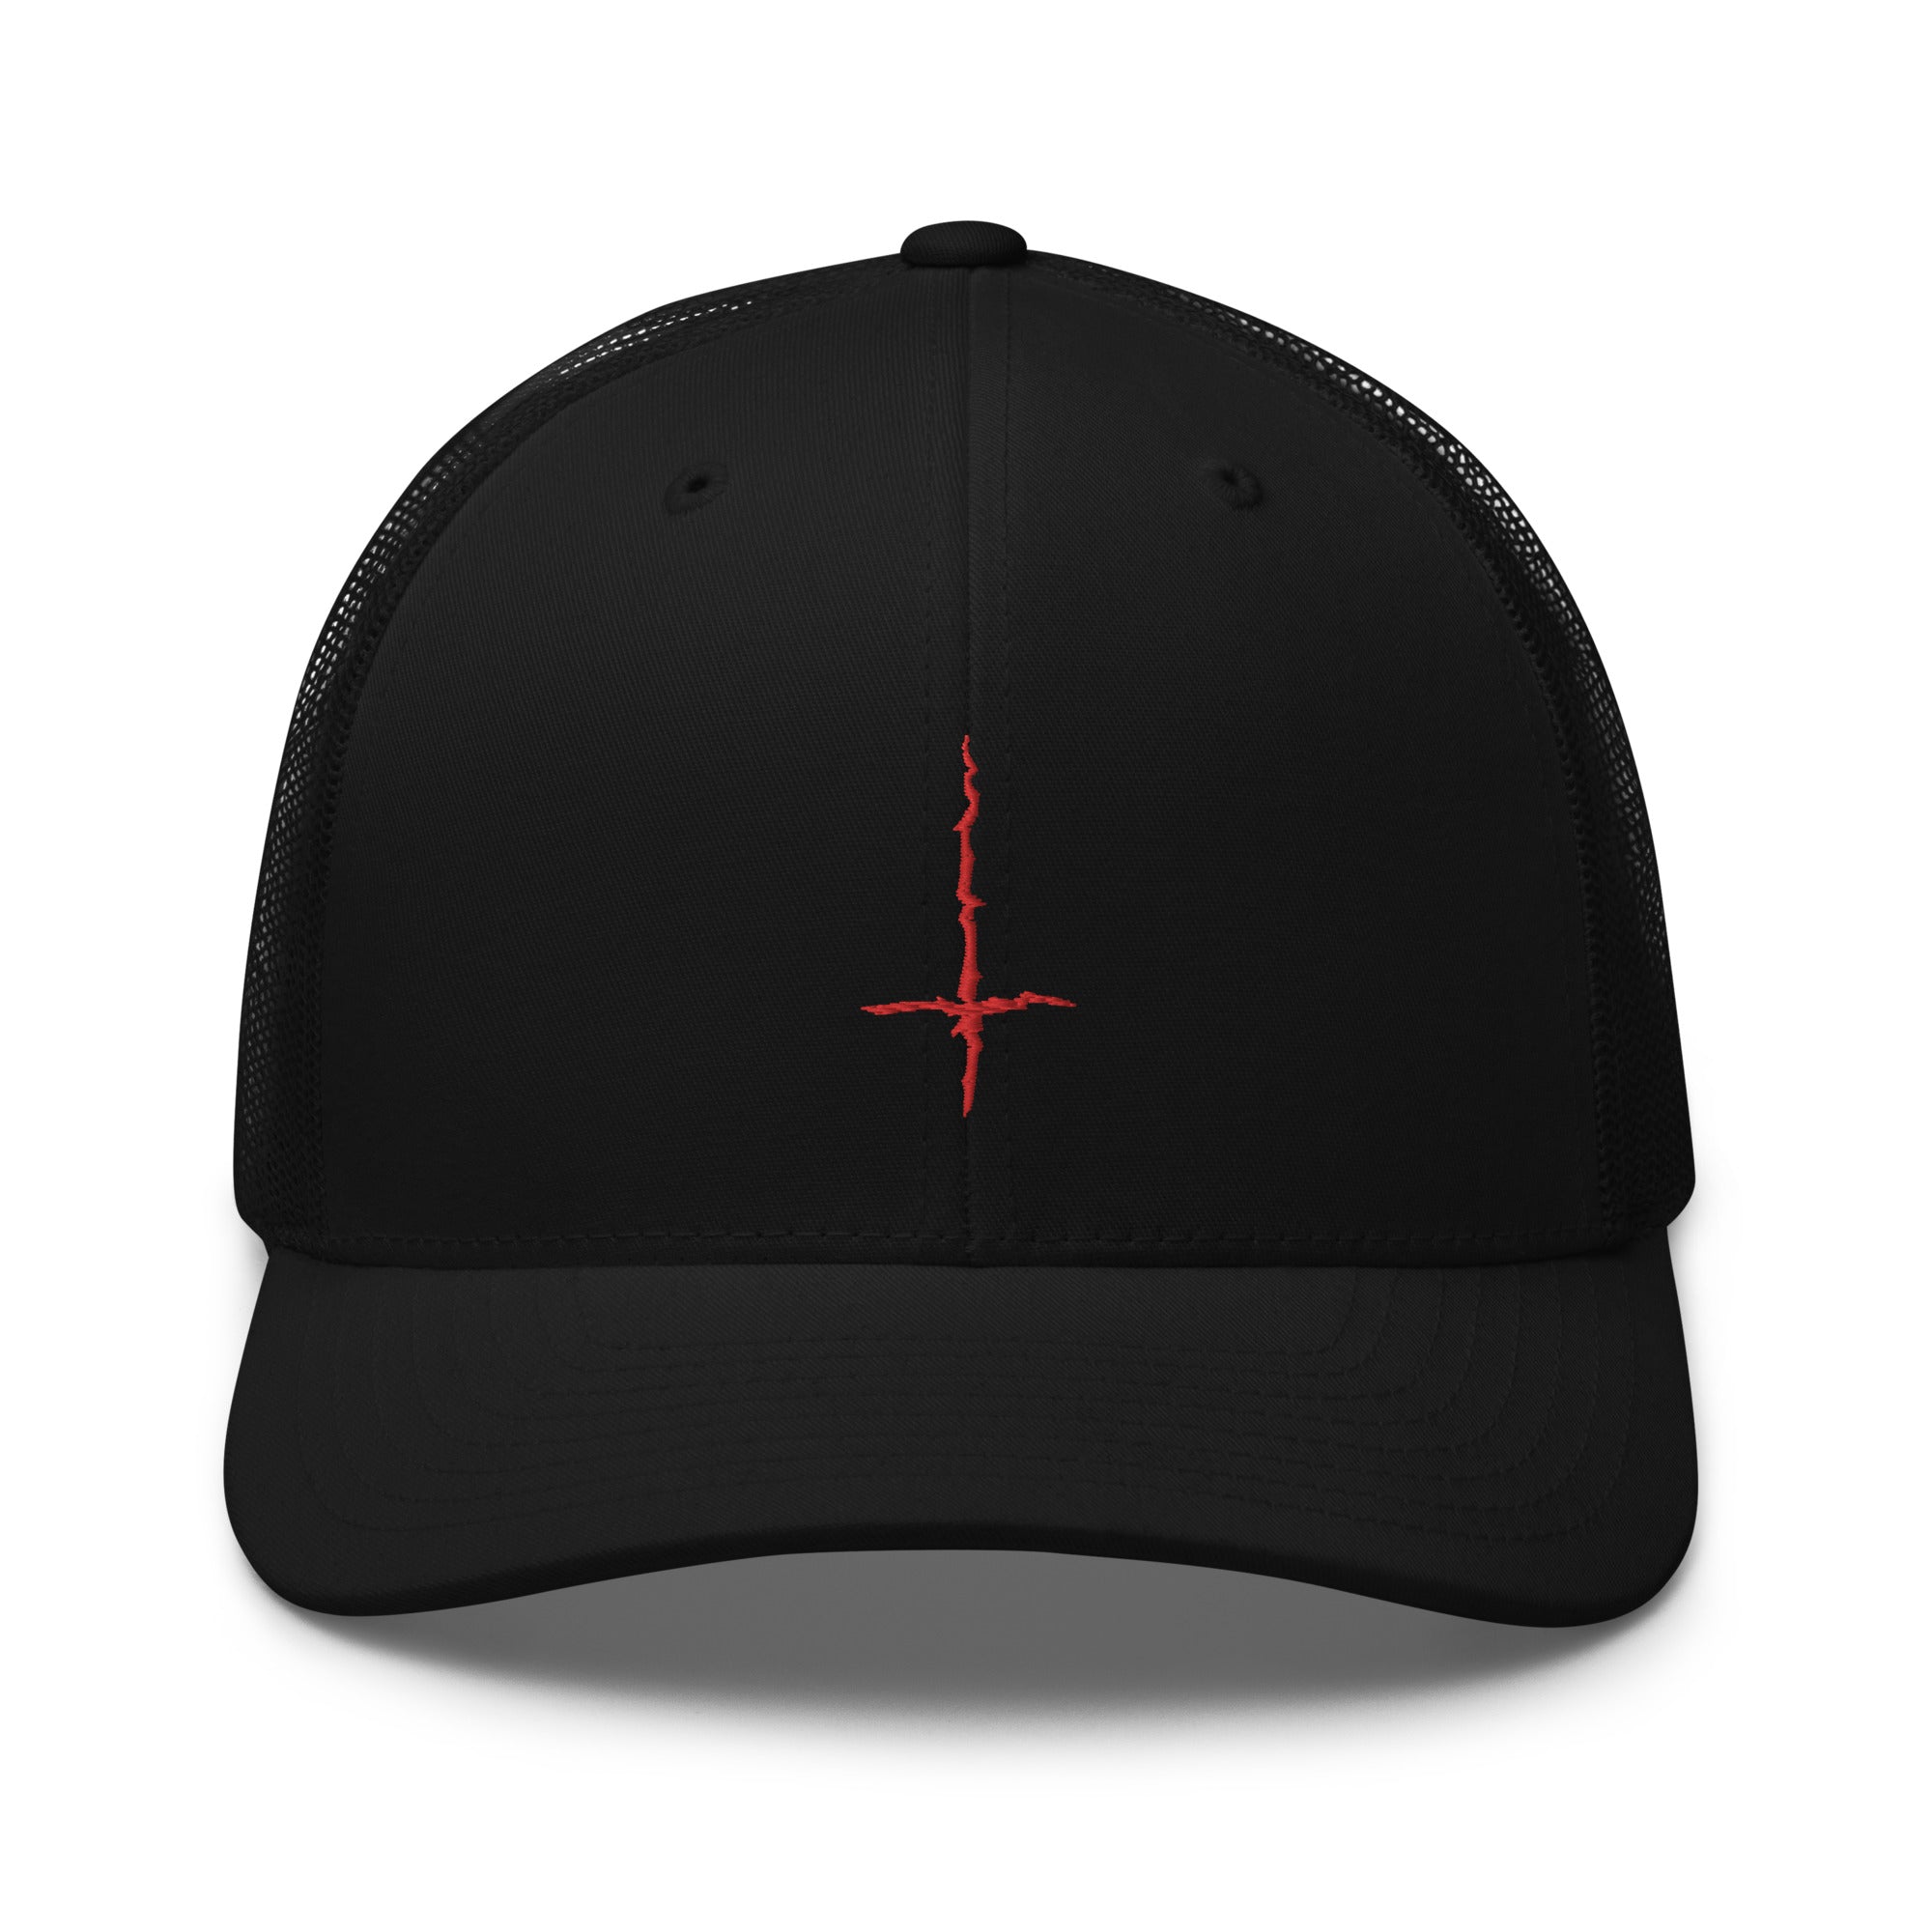 Red Inverted Cross Black Metal Style Embroidered Trucker Cap Snapback Hat